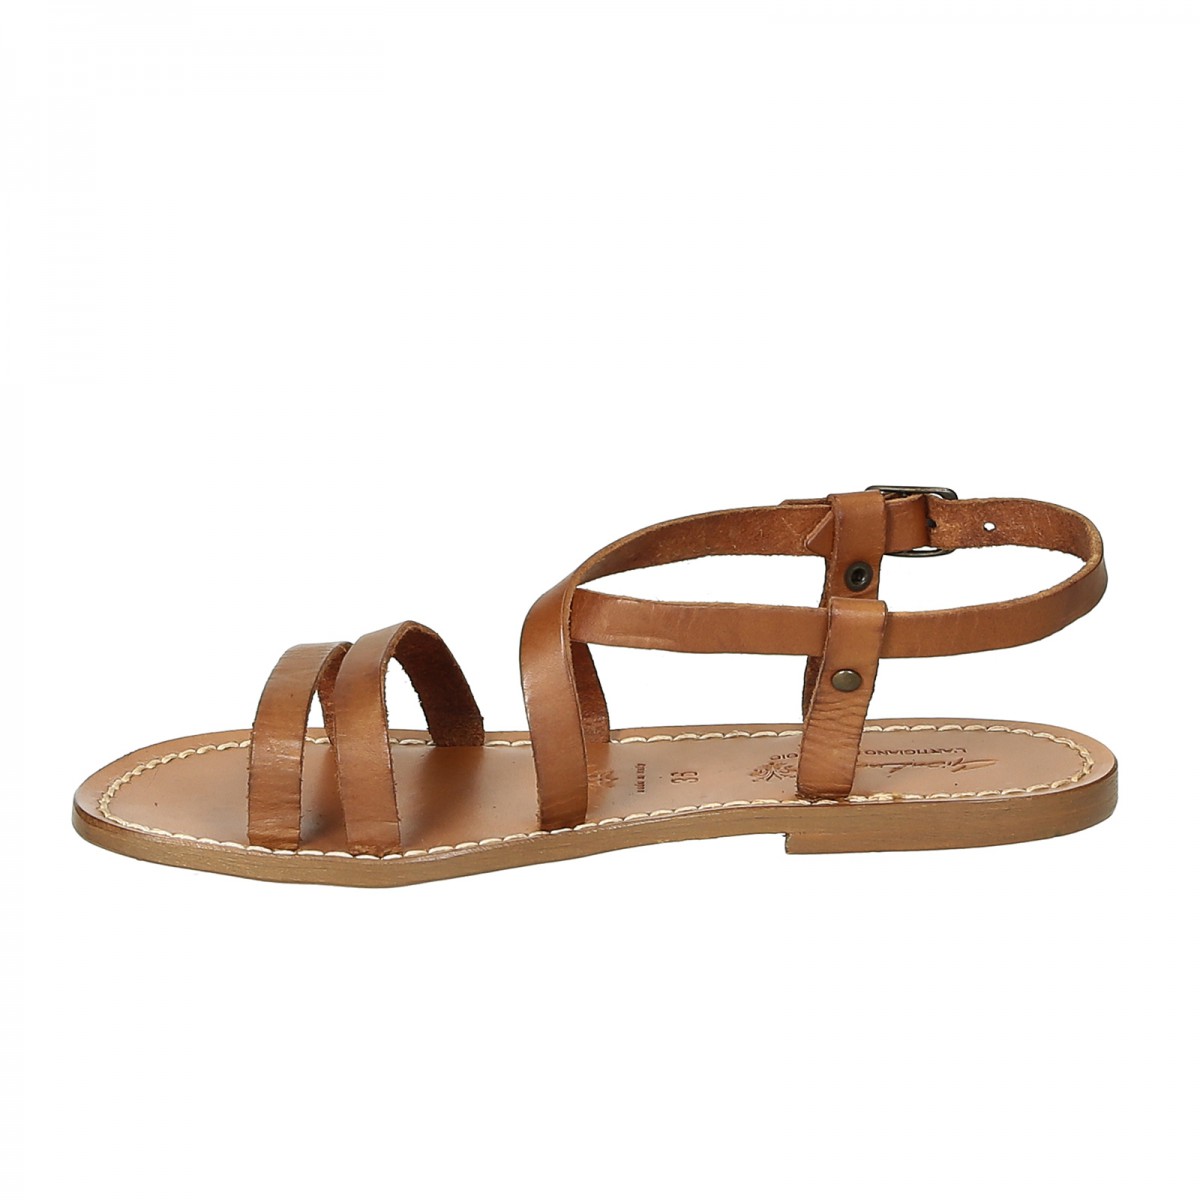 Women's tan leather sandals hand made in Italy | The leather craftsmen